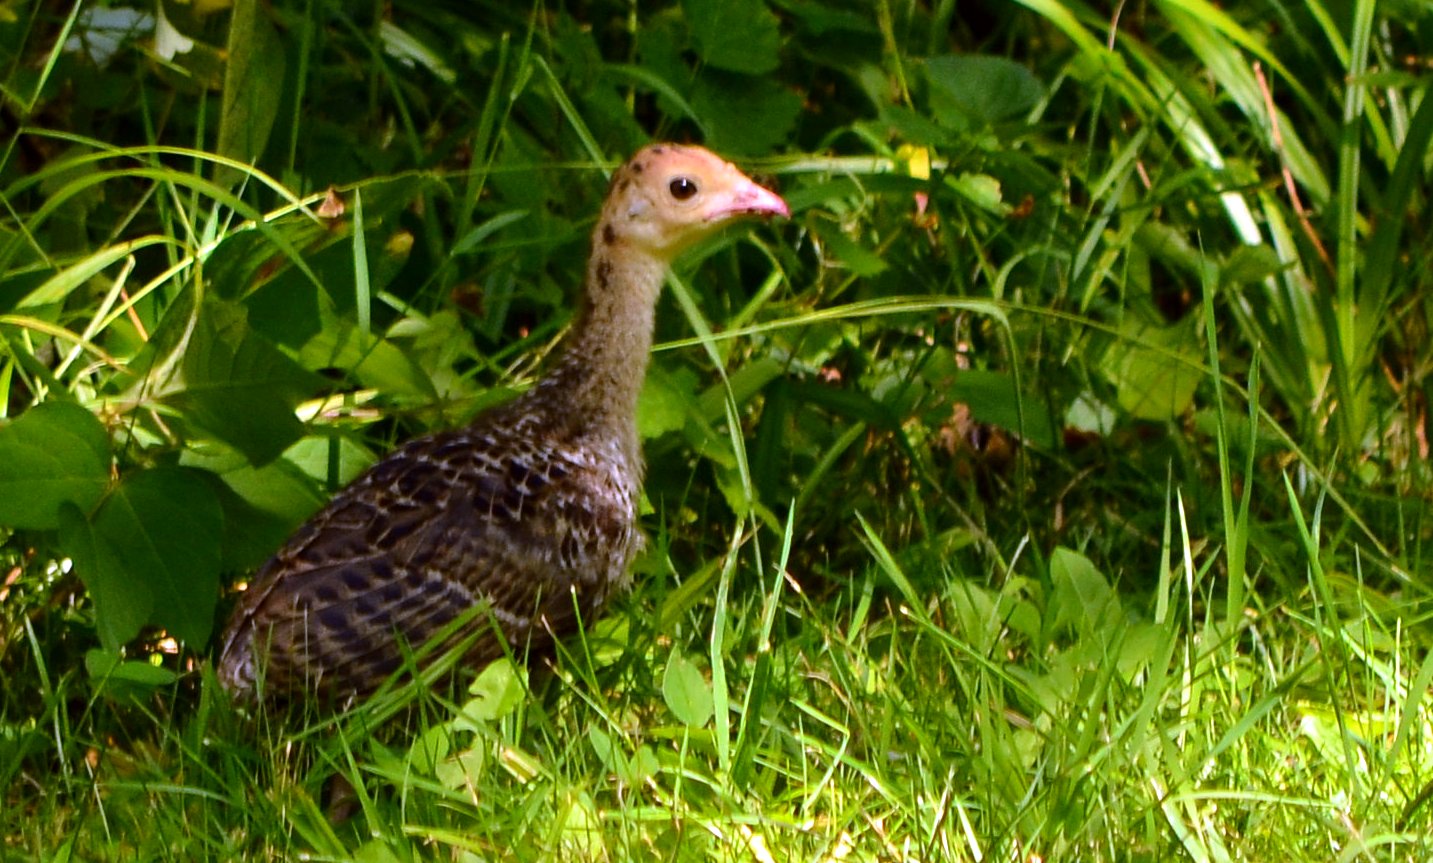 an image of a duck in the grass